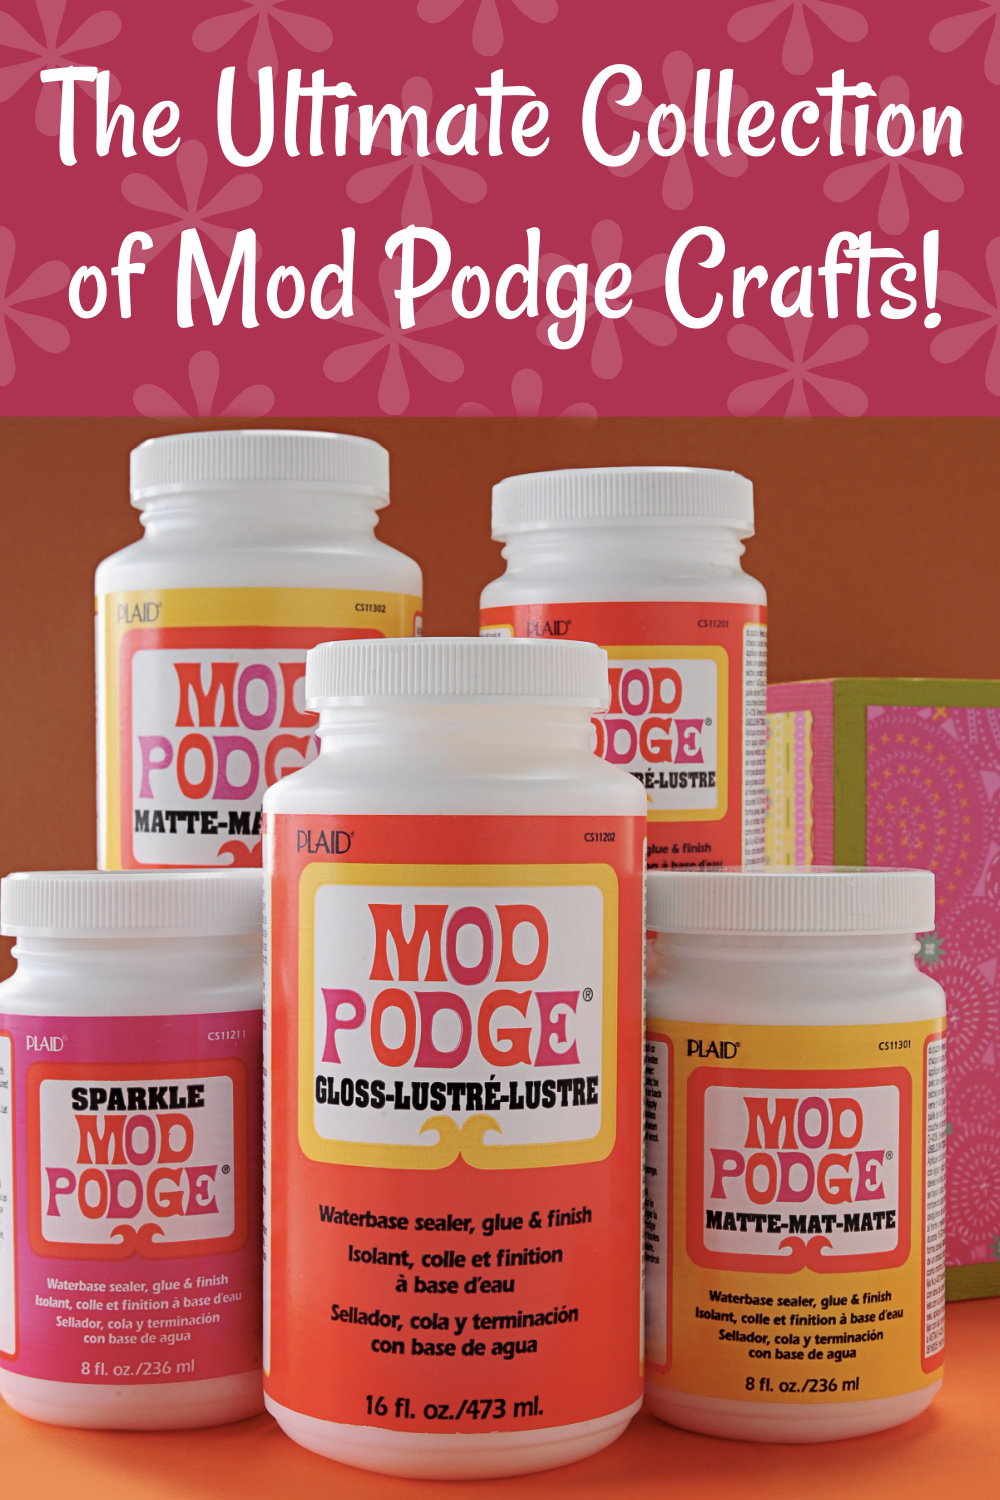 The ultimate collection of Mod Podge craft projects